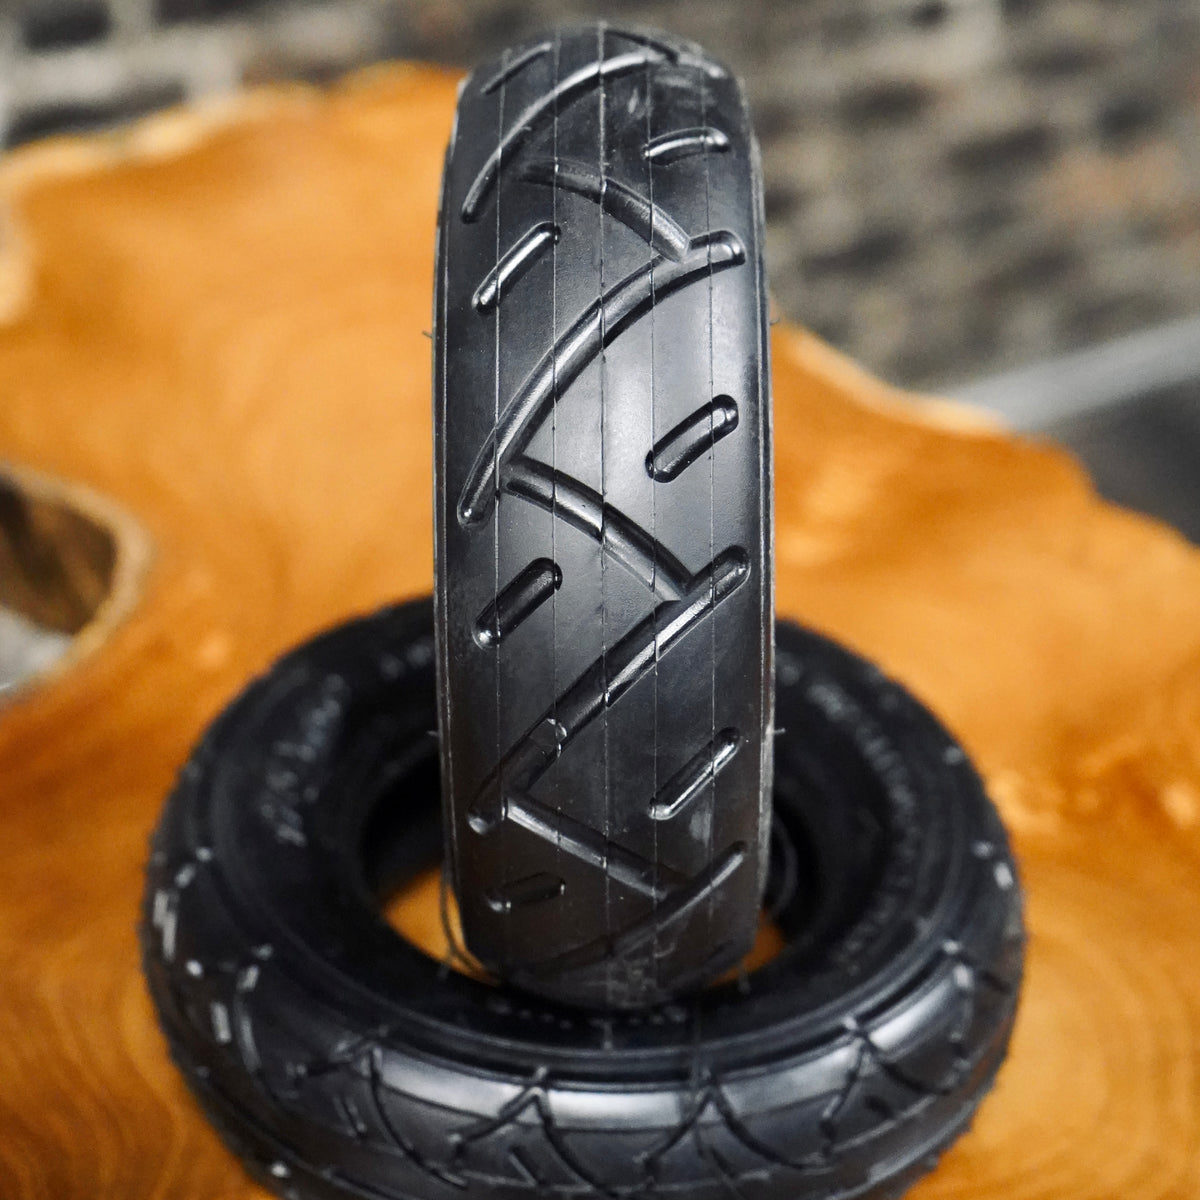 Replacement Tires - Evolve Skateboards